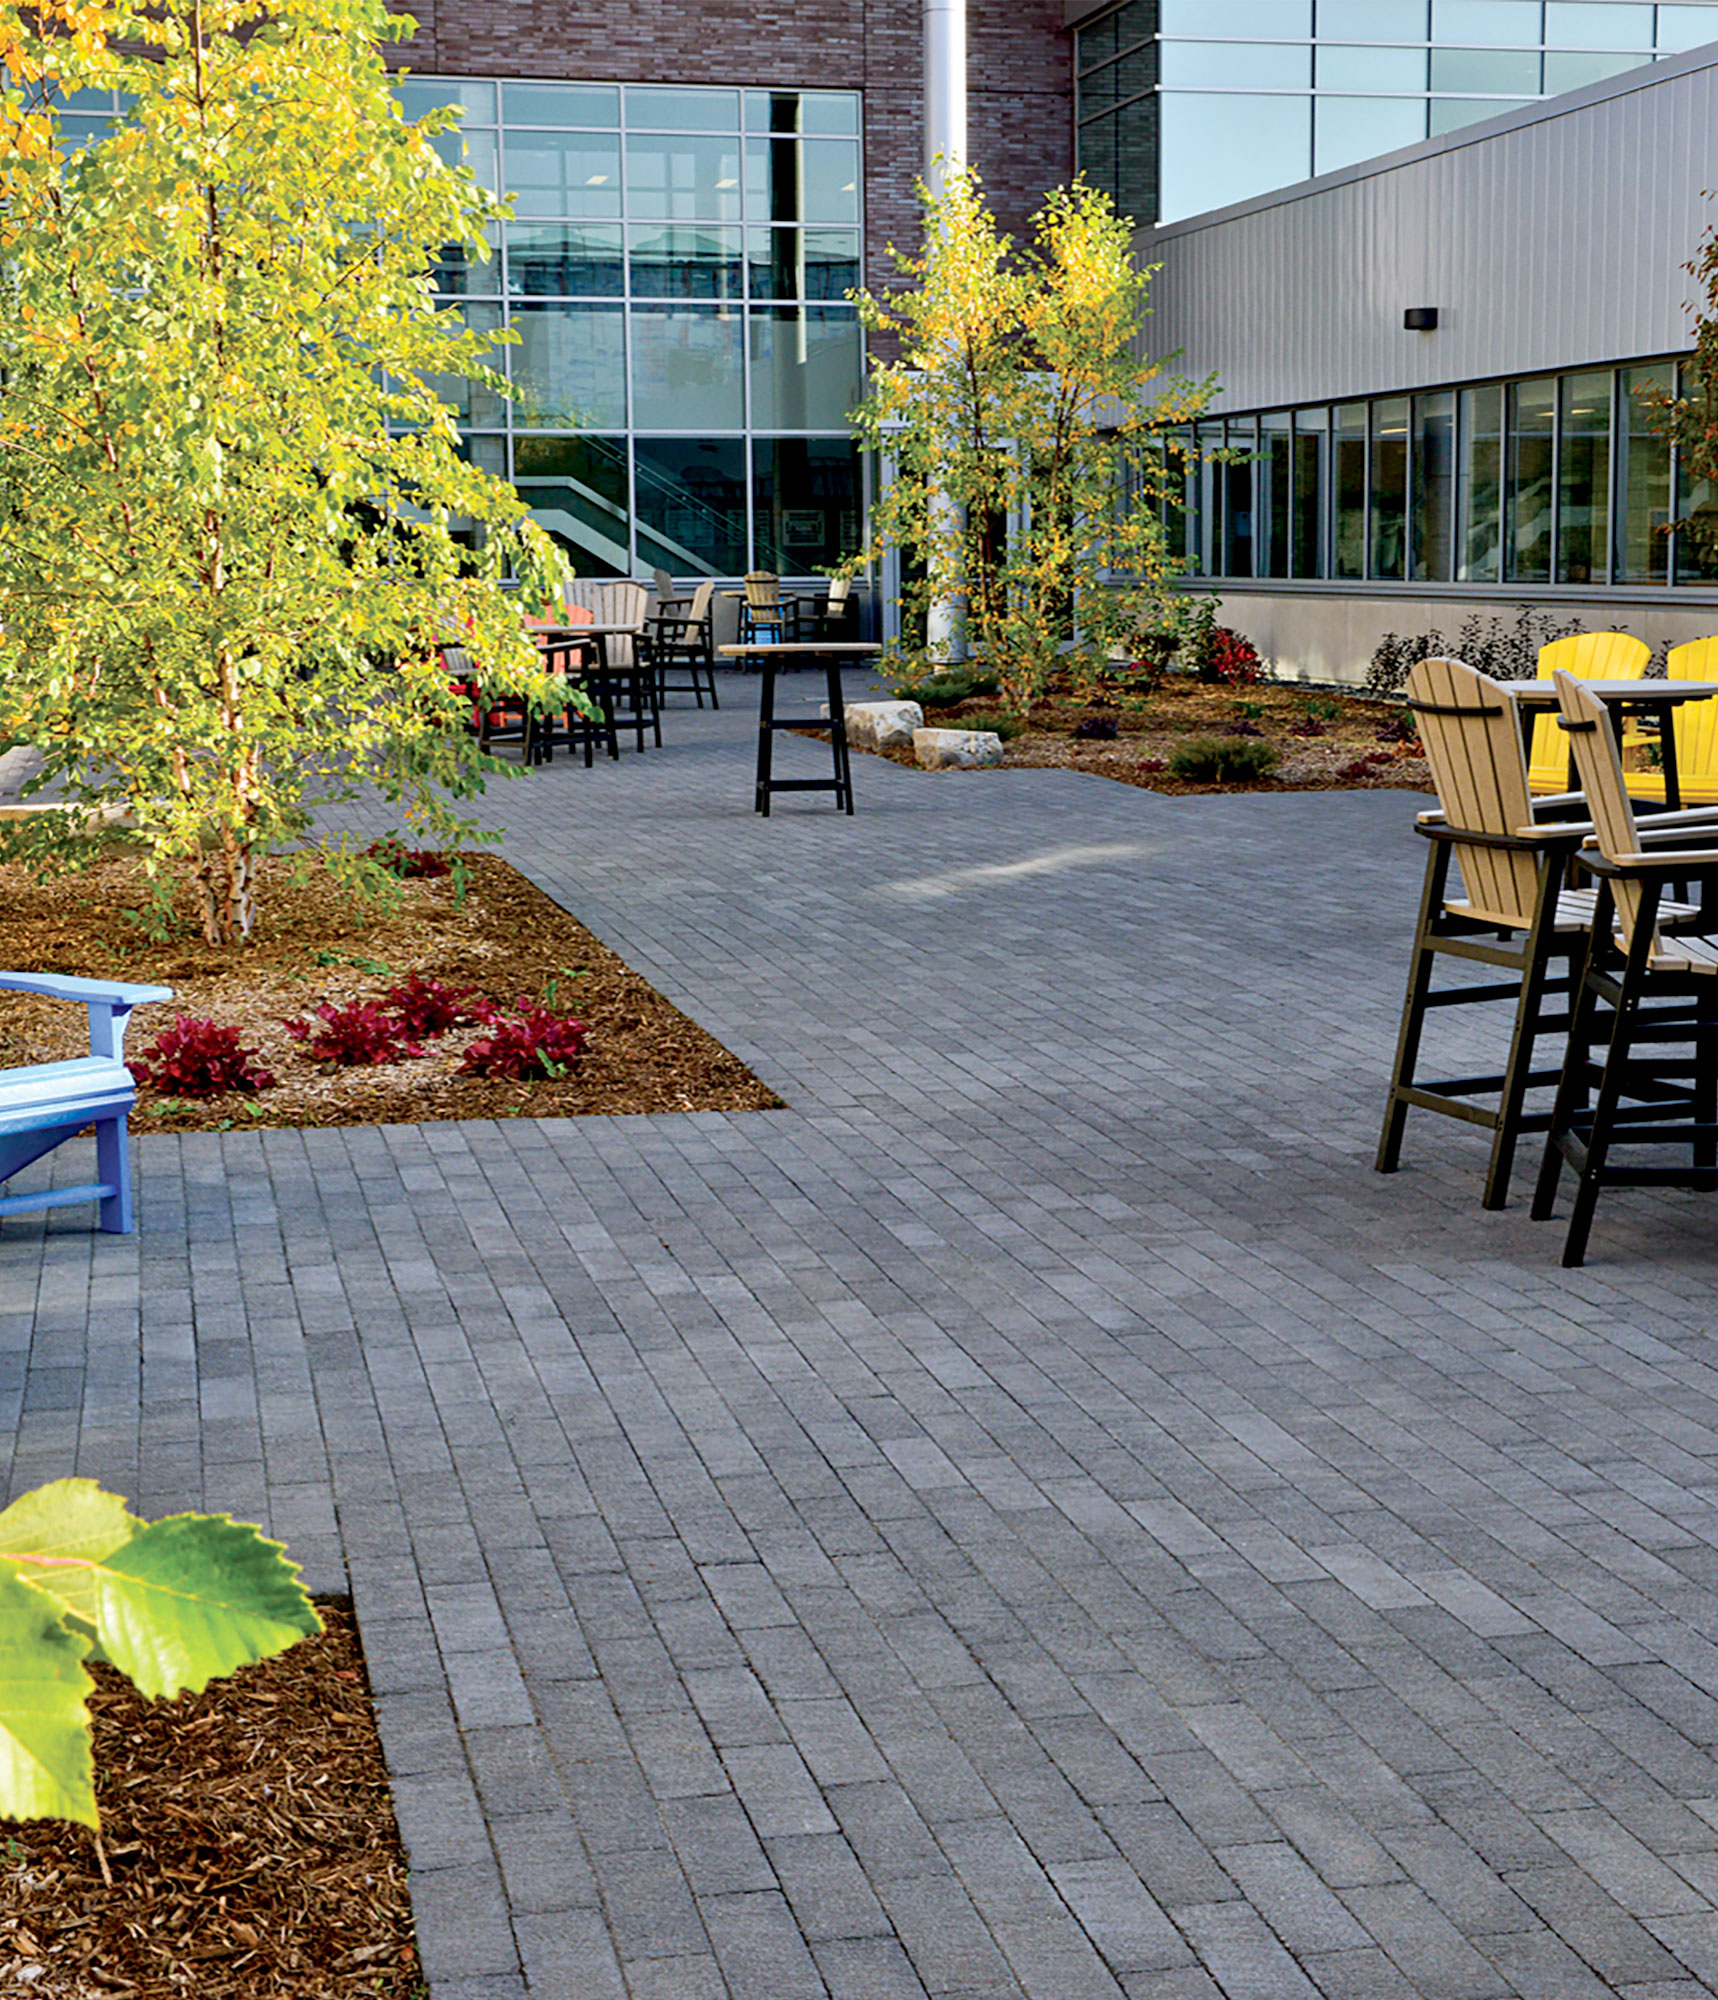 Black Il Campo pavers and modest garden beds help visually elevate surrounding colorful Adirondack chairs and beige tables.